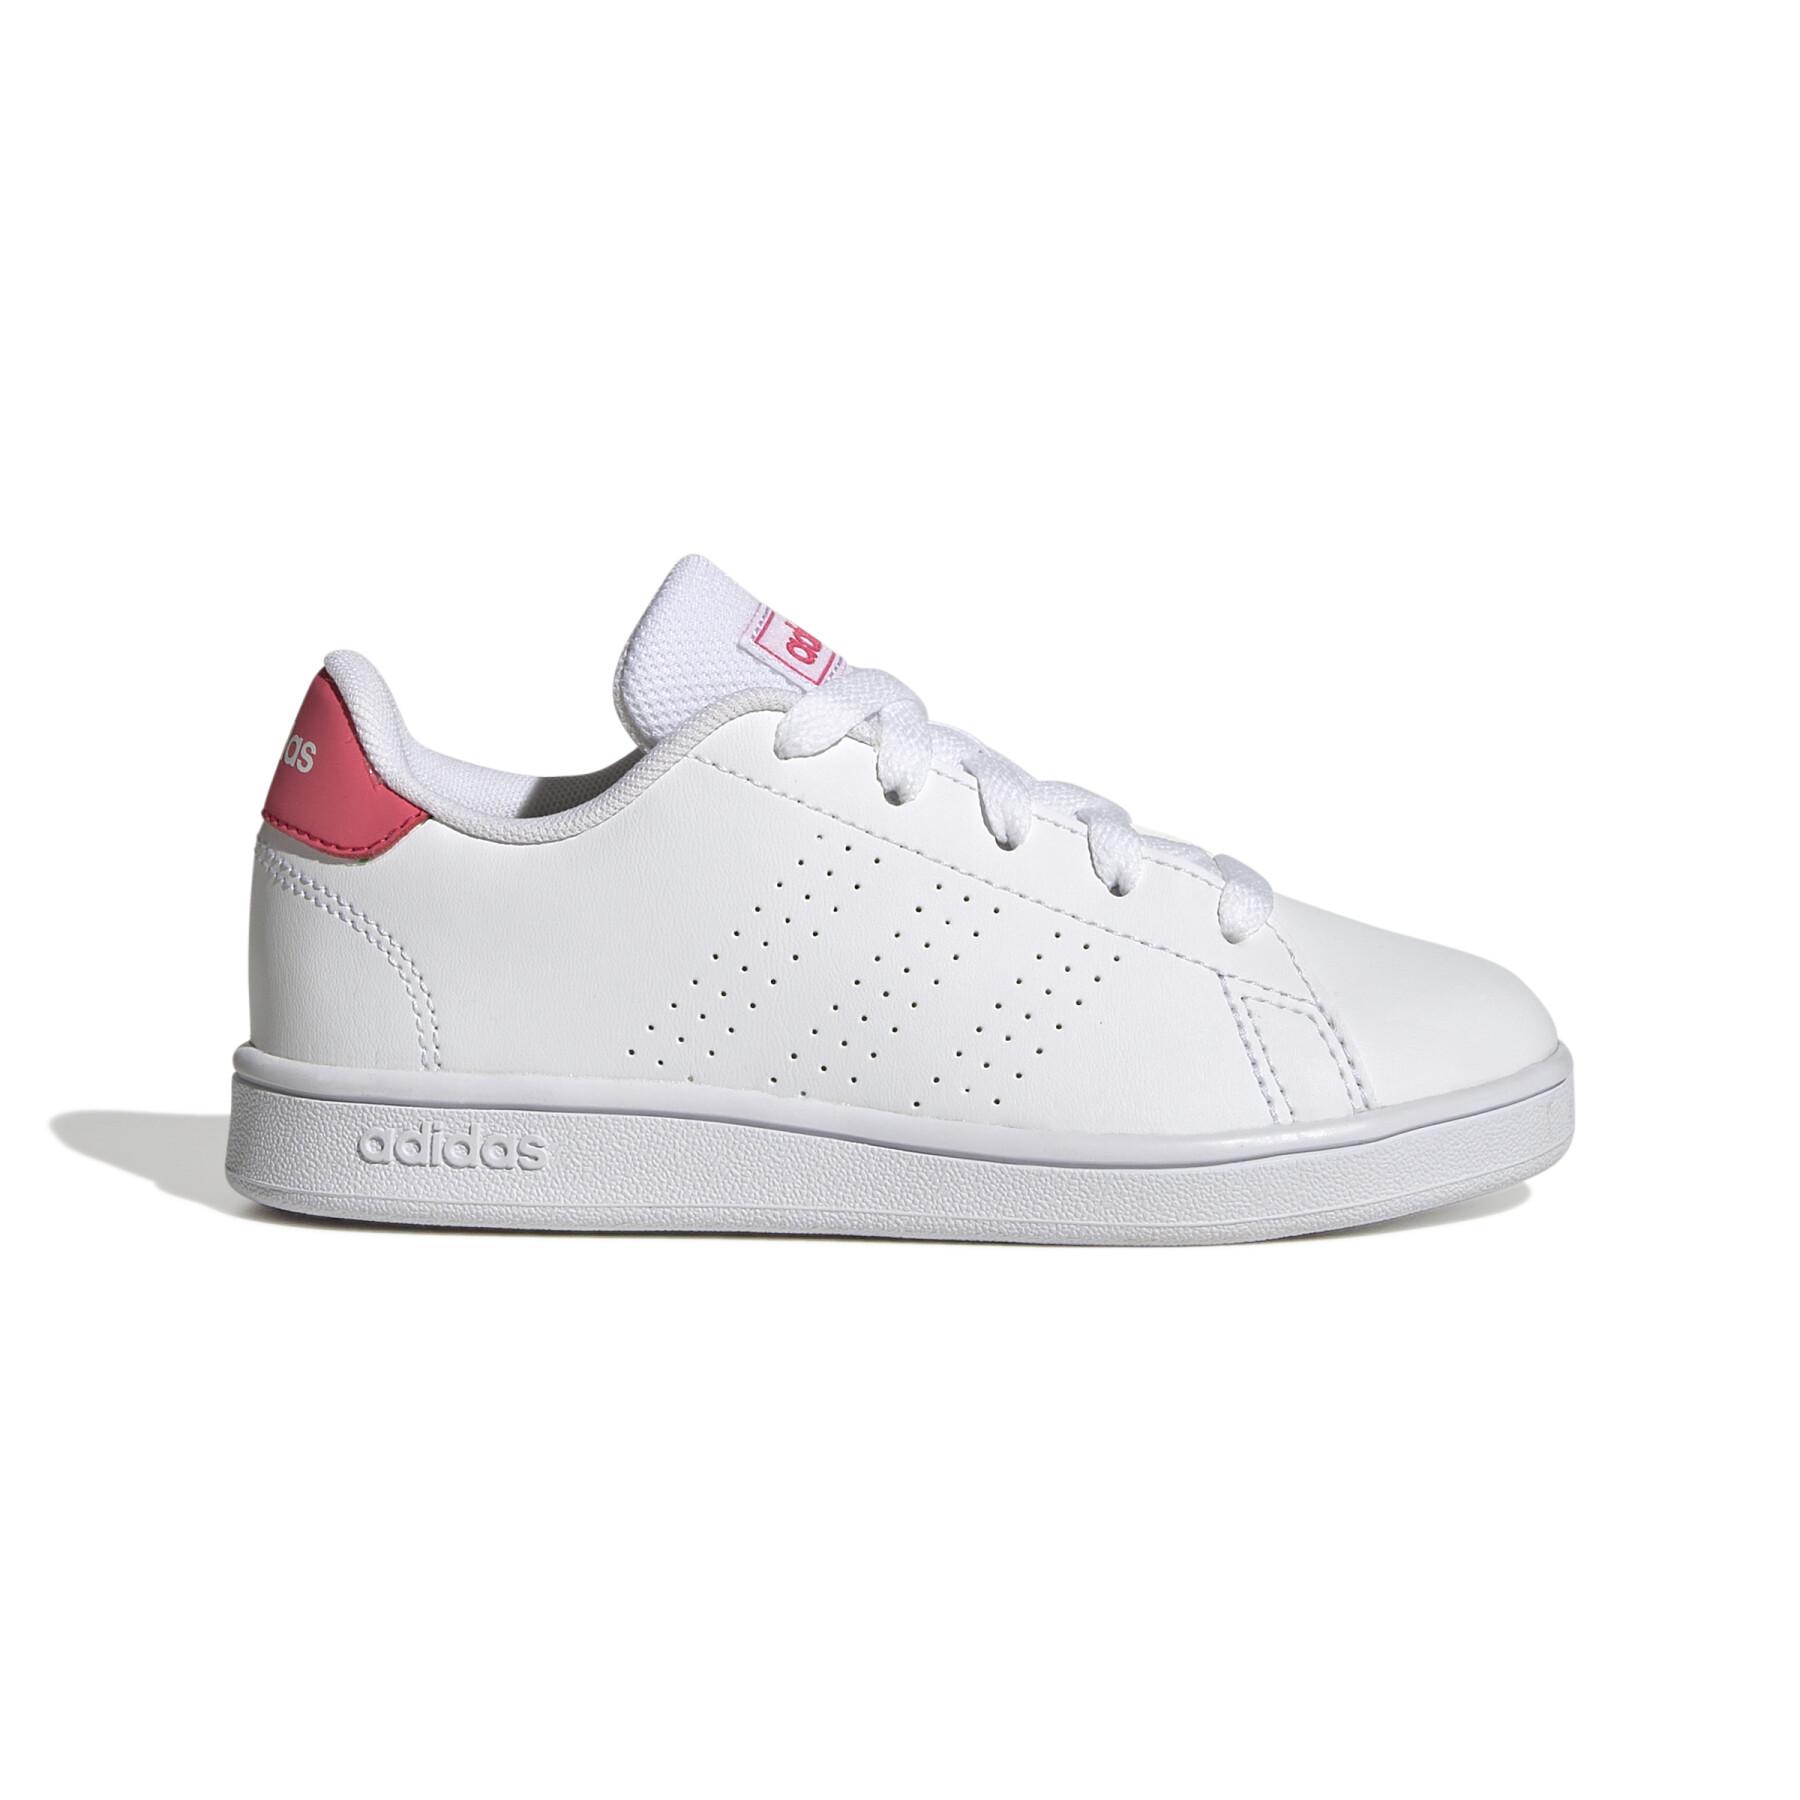 Short lace-up sneakers for kids adidas Originals Advantage - adidas Originals - Junior Sneakers -